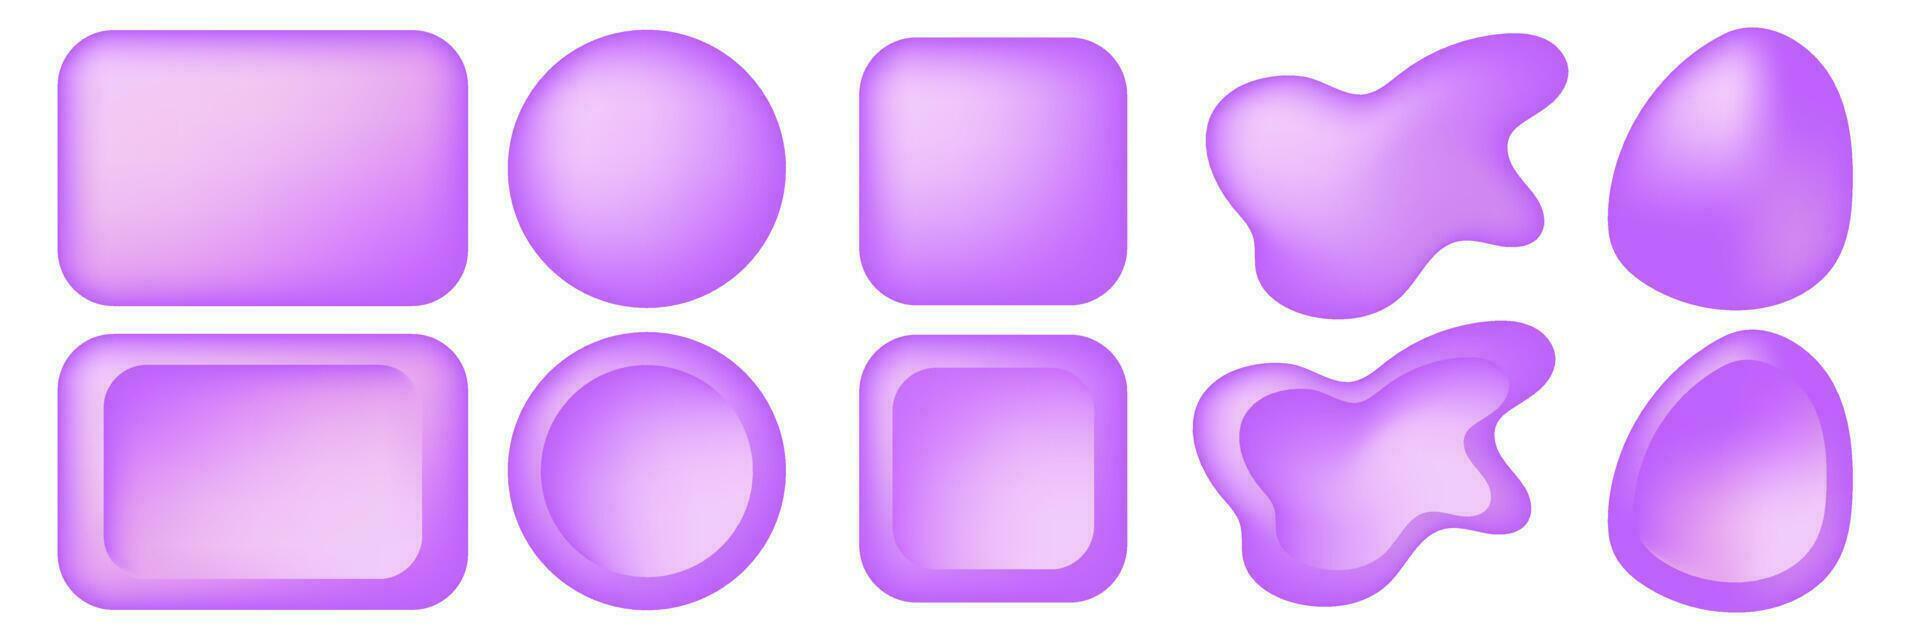 A set of 3d purple speech bubbles and abstract shapes. A set of vector bubbles with empty text of various forms, comments, dialogues. Mental clouds of different shapes, such as rectangle, ellipse